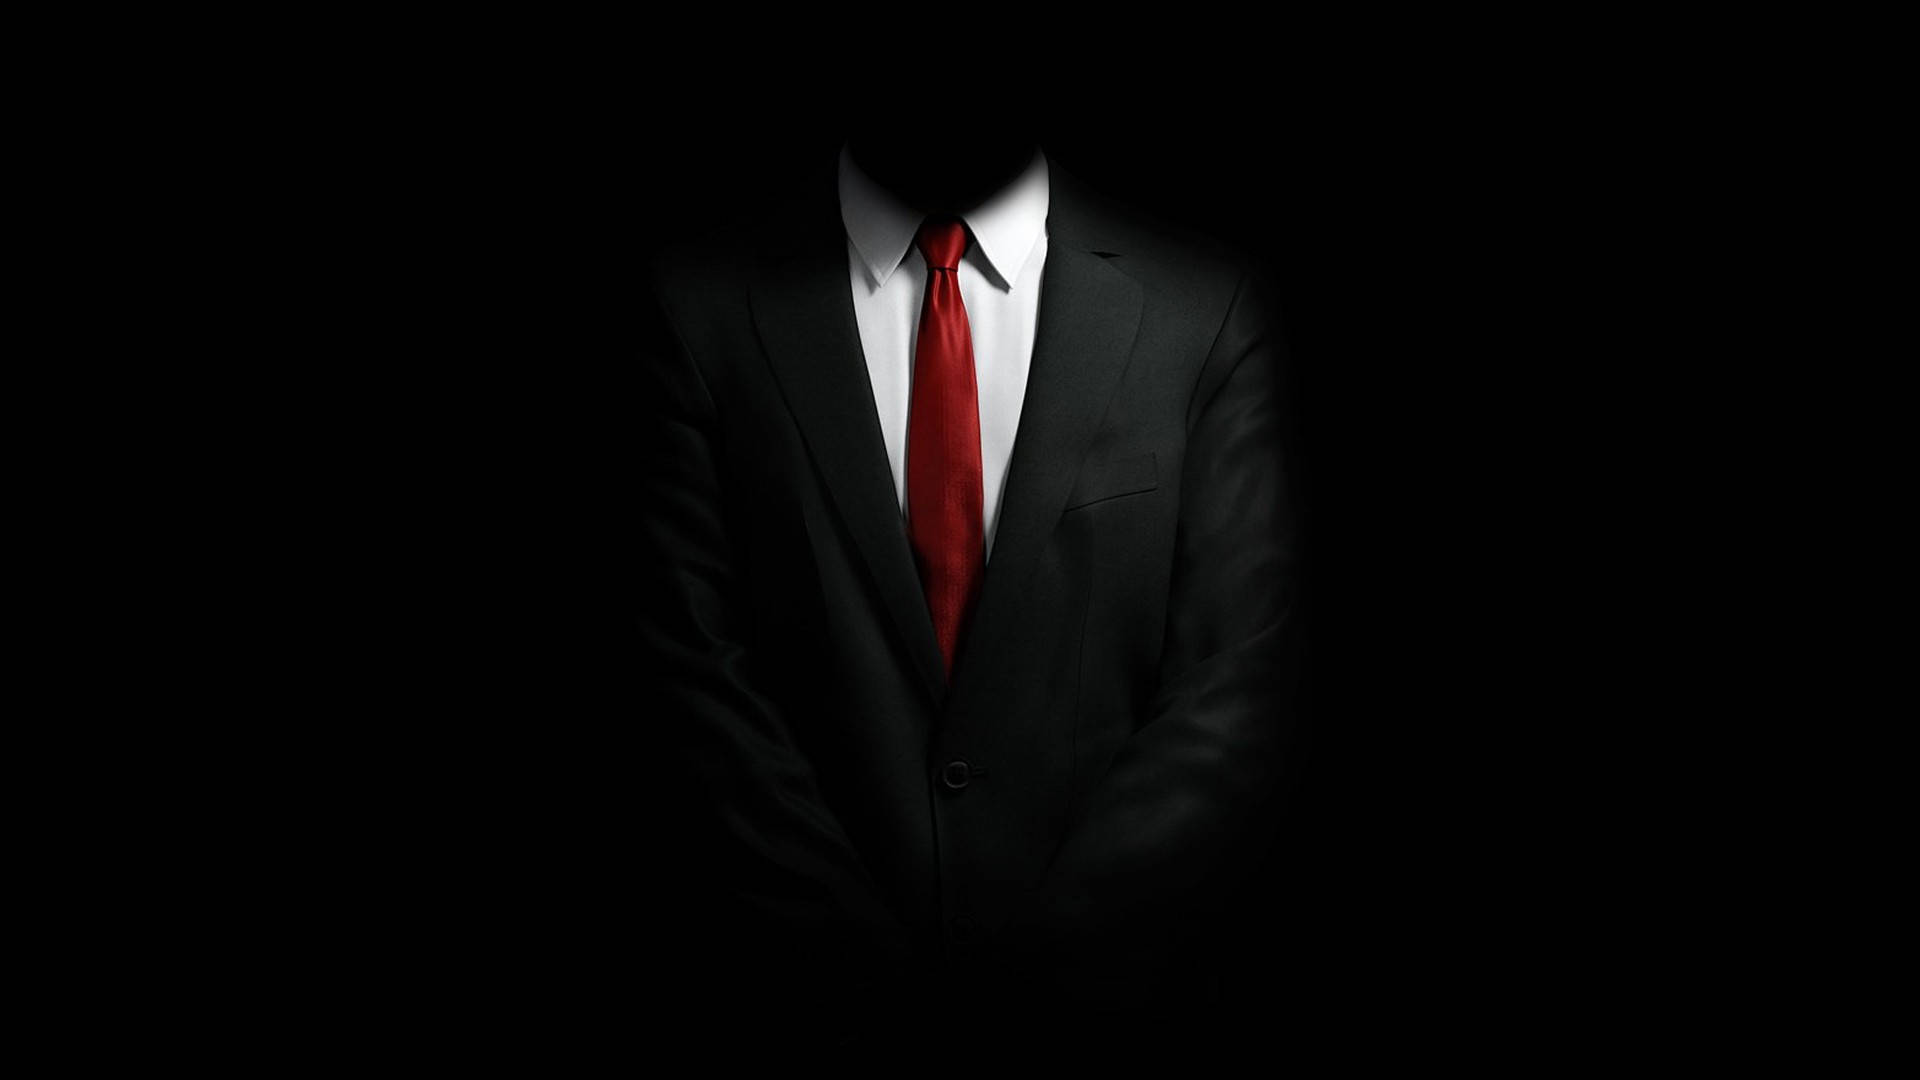 Hitman Hd Iconic Suit And Tie Wallpaper